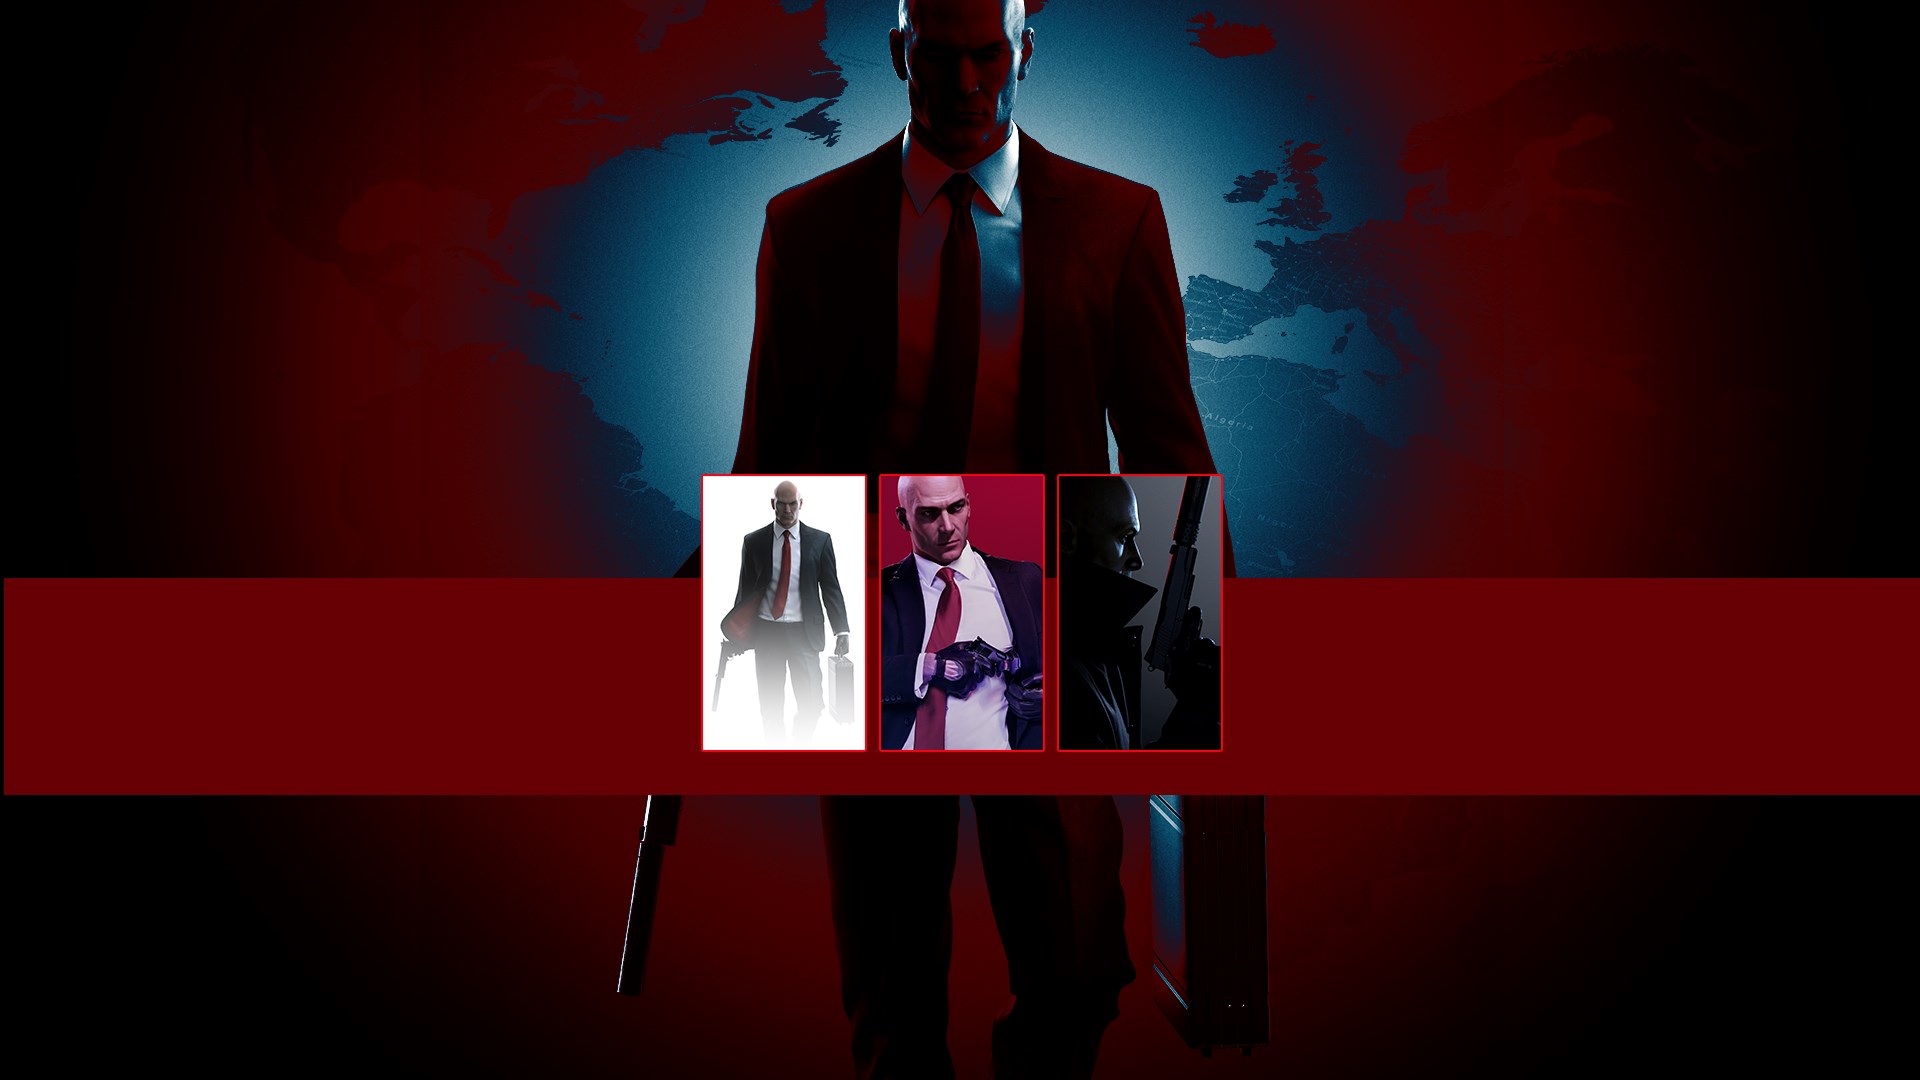 HITMAN Trilogy Is Now Available For PC, Xbox One, And Xbox Series X|S
(Game Pass)